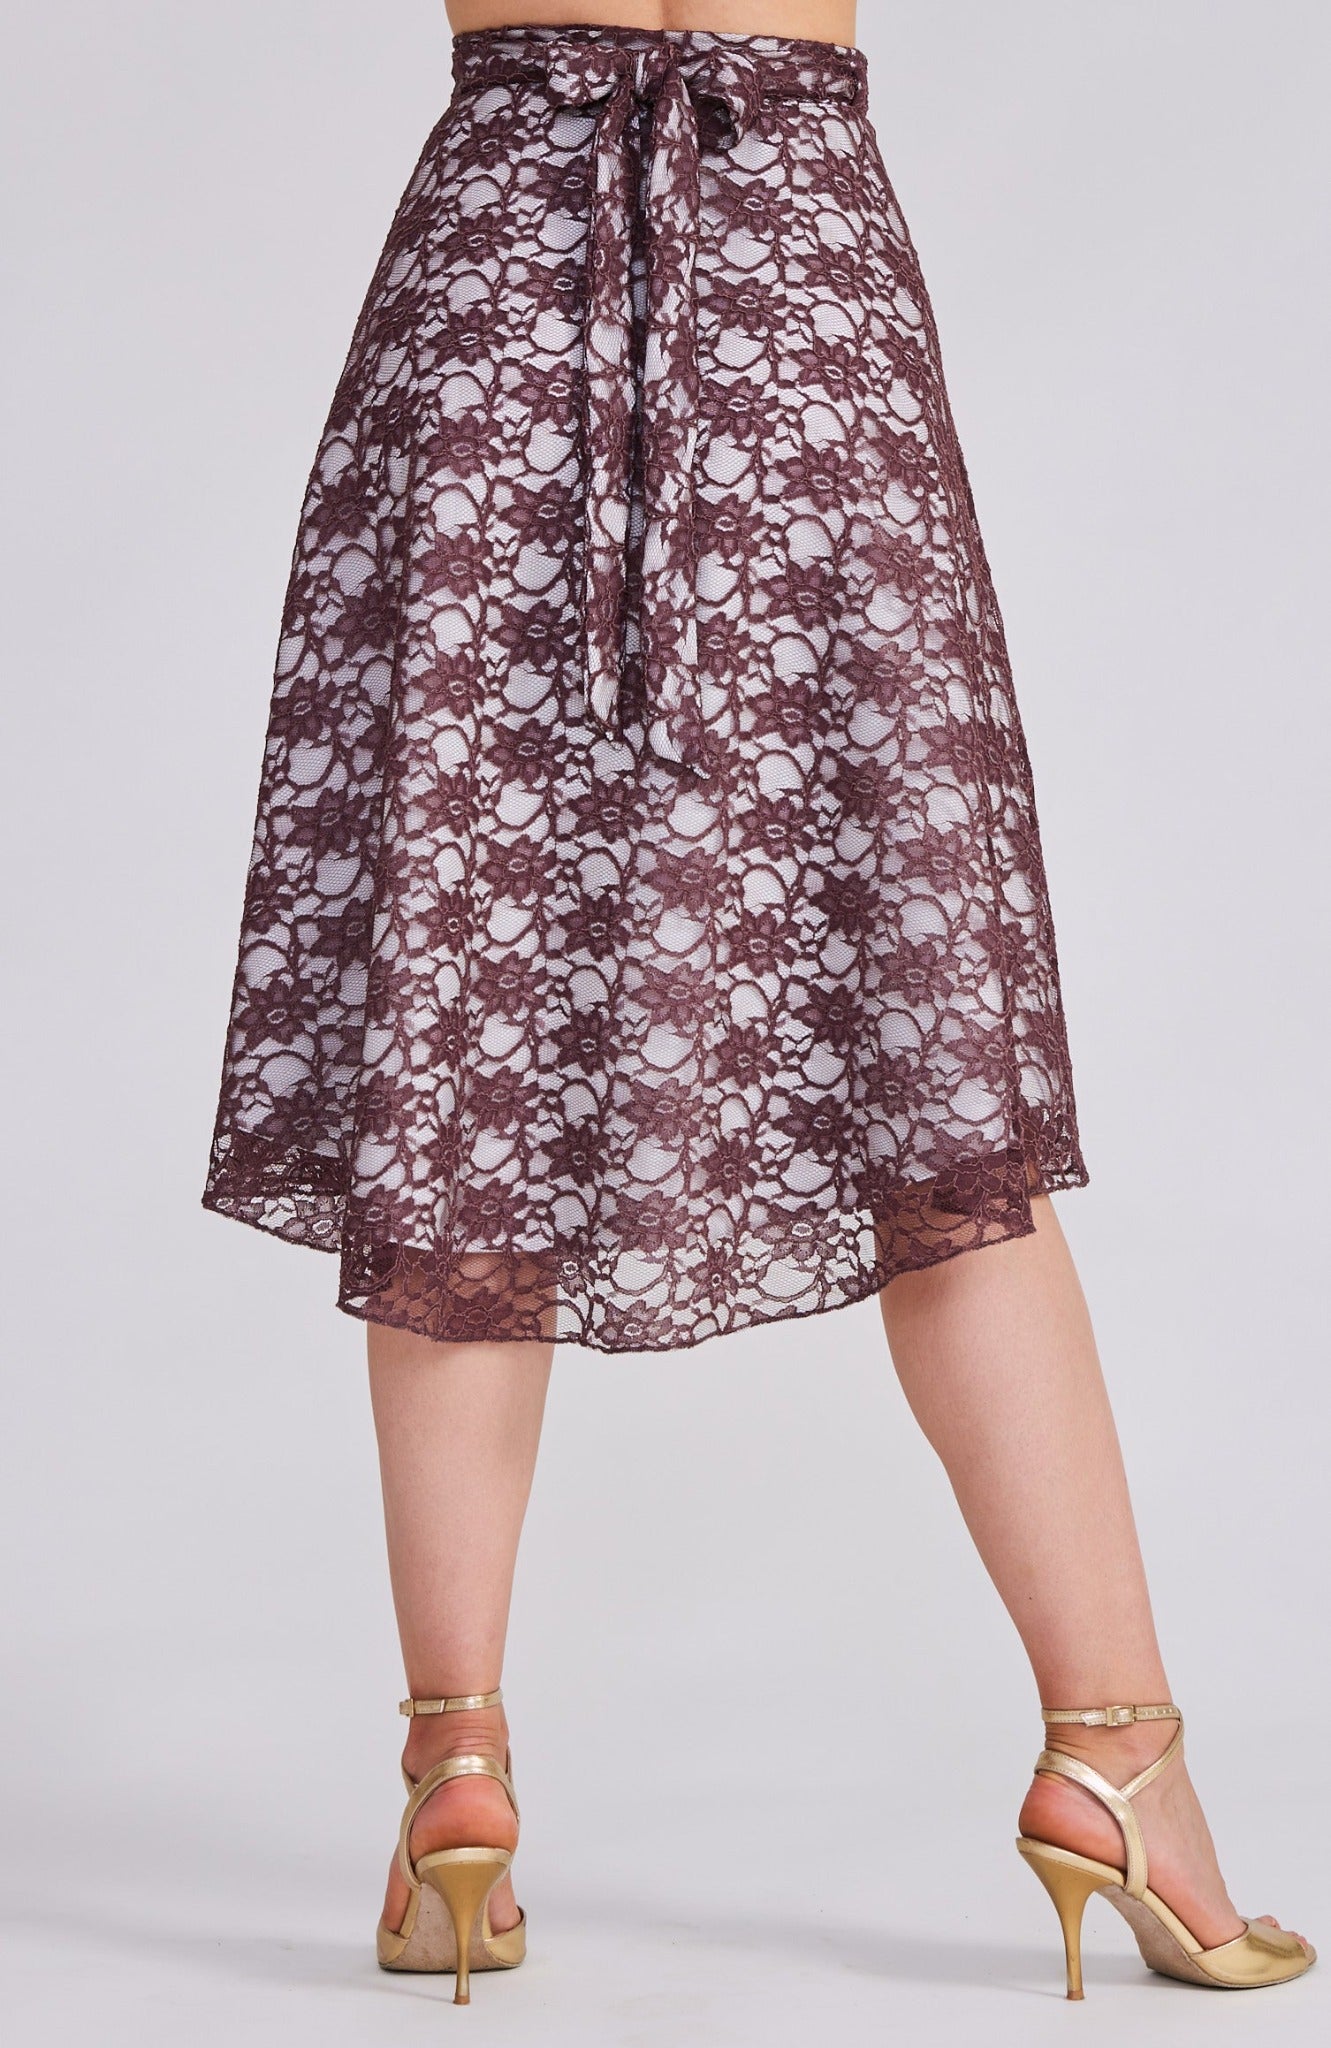 wrap skirt in chocolate brown lace 